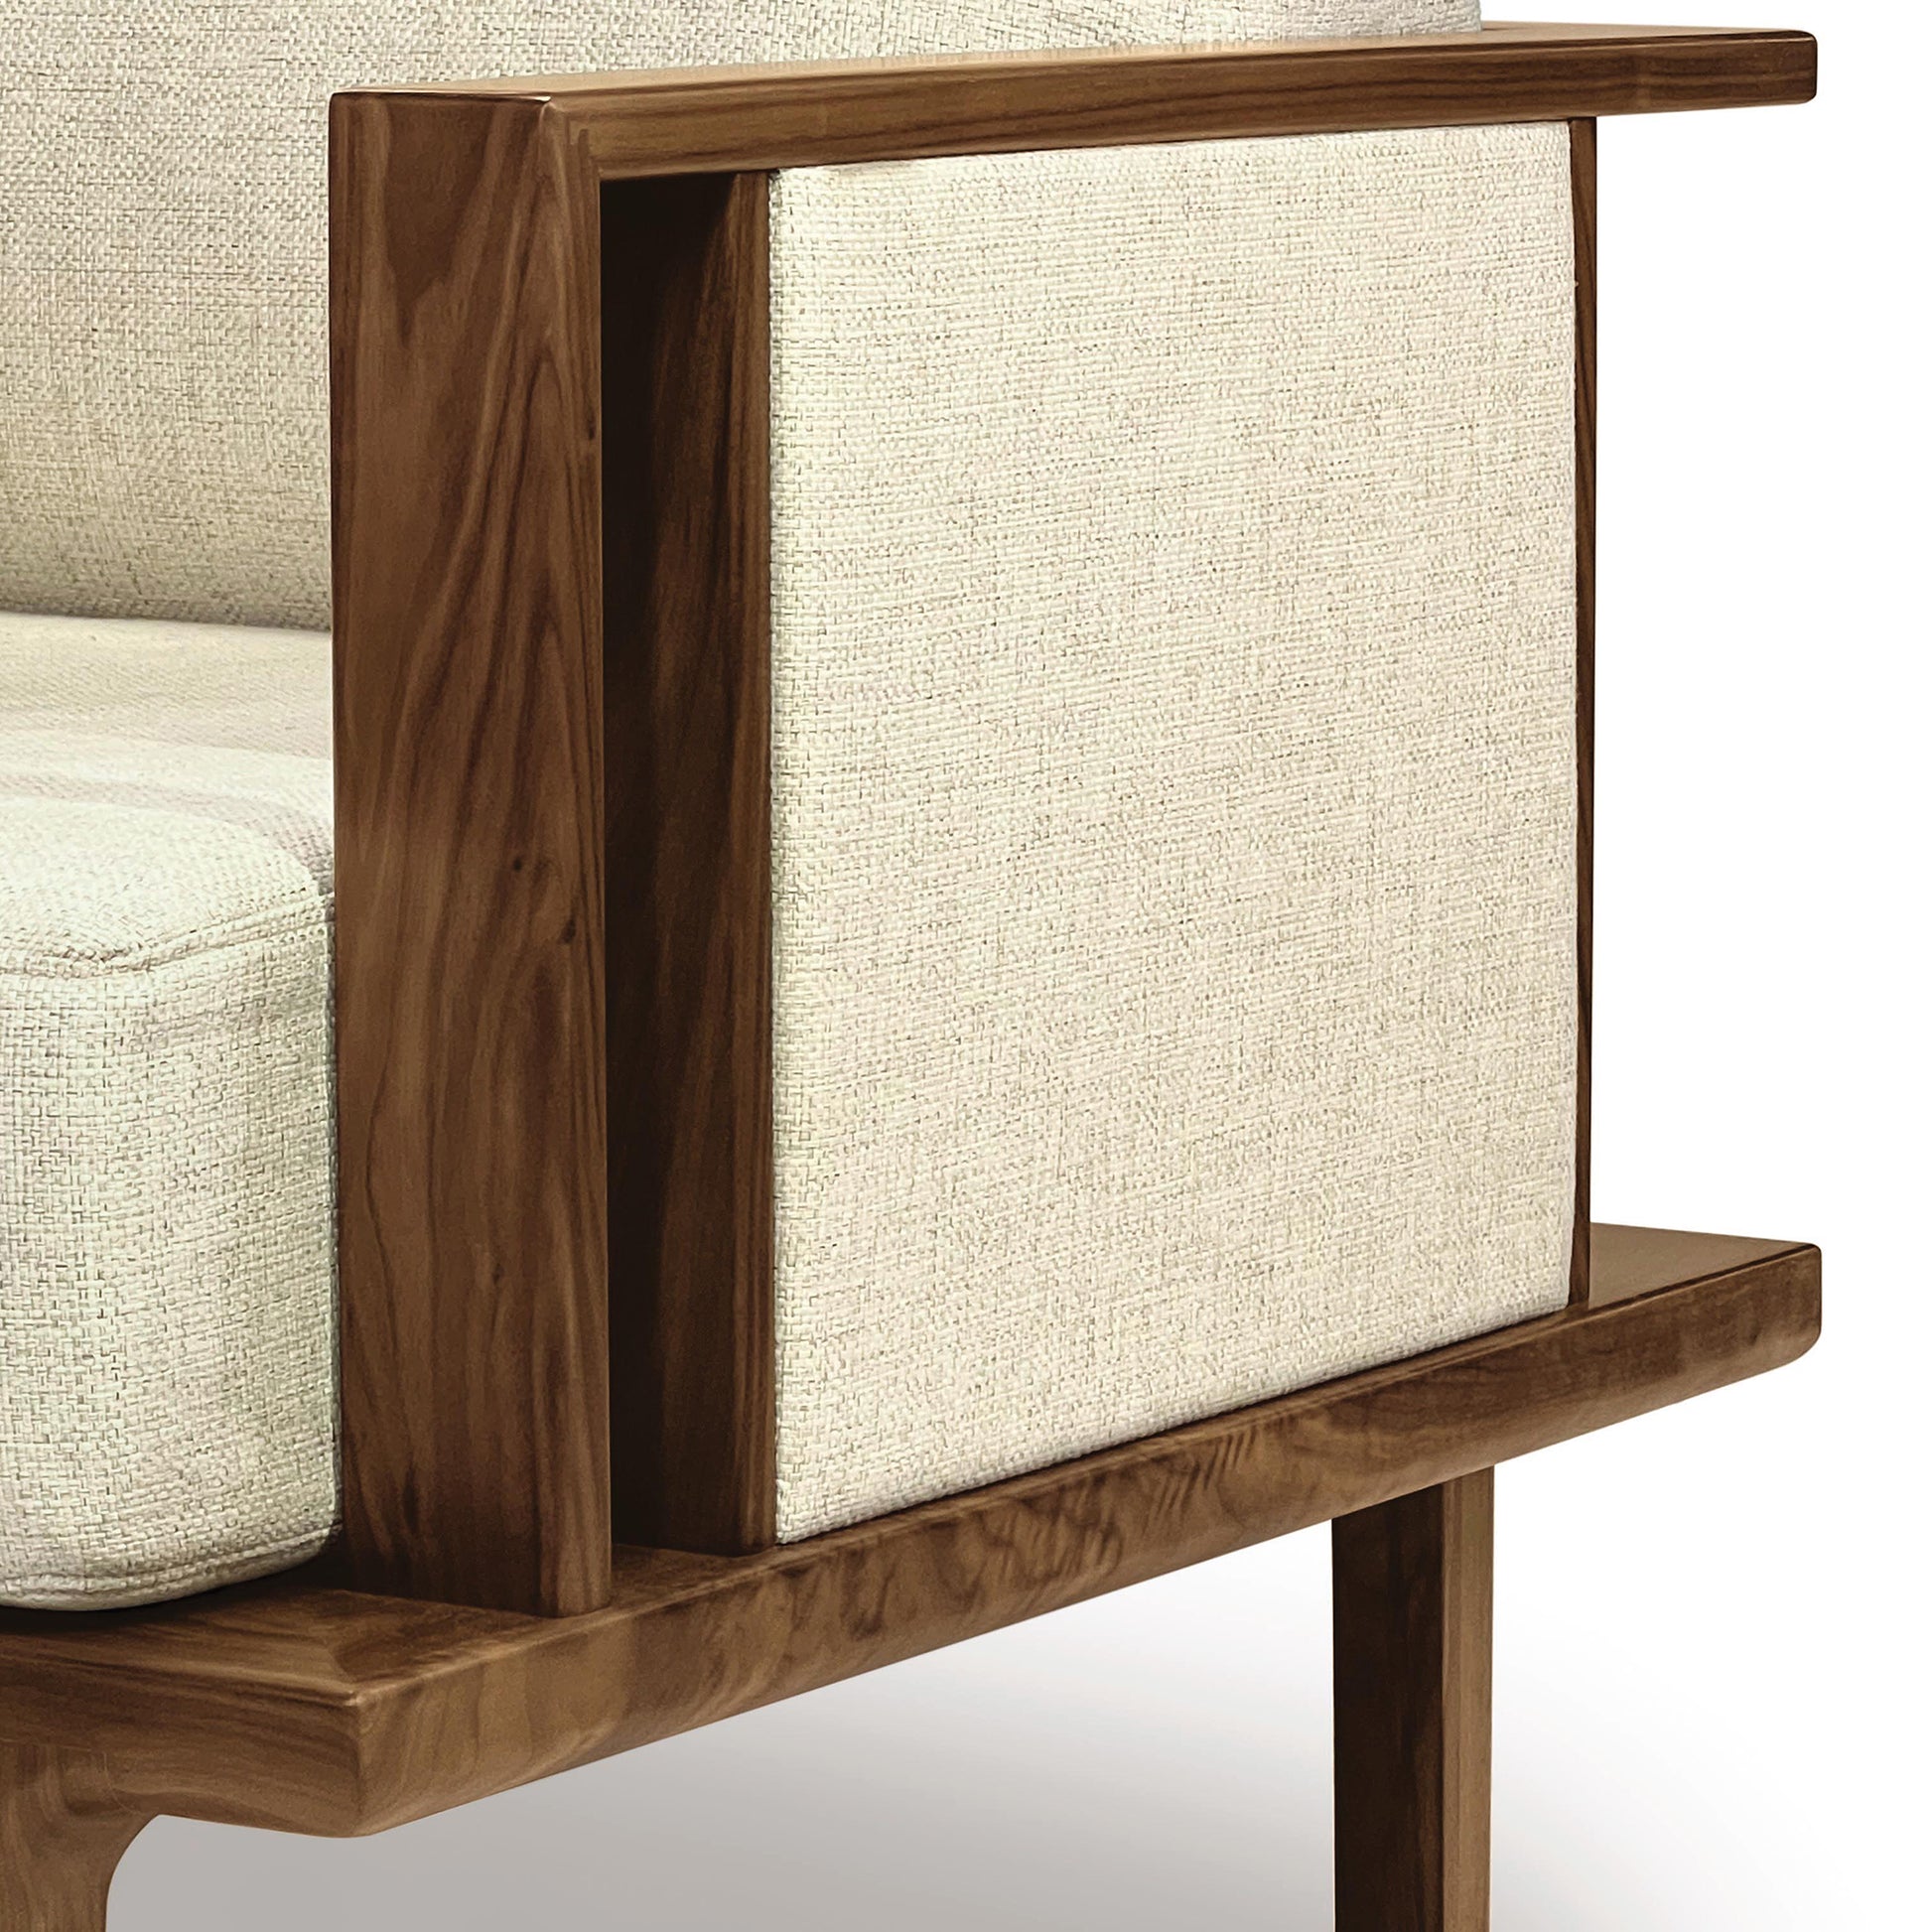 The Sierra Walnut Upholstered Chair with Upholstered Panels by Copeland Furniture features a modern design with a wooden frame and beige fabric on its upholstered panels.